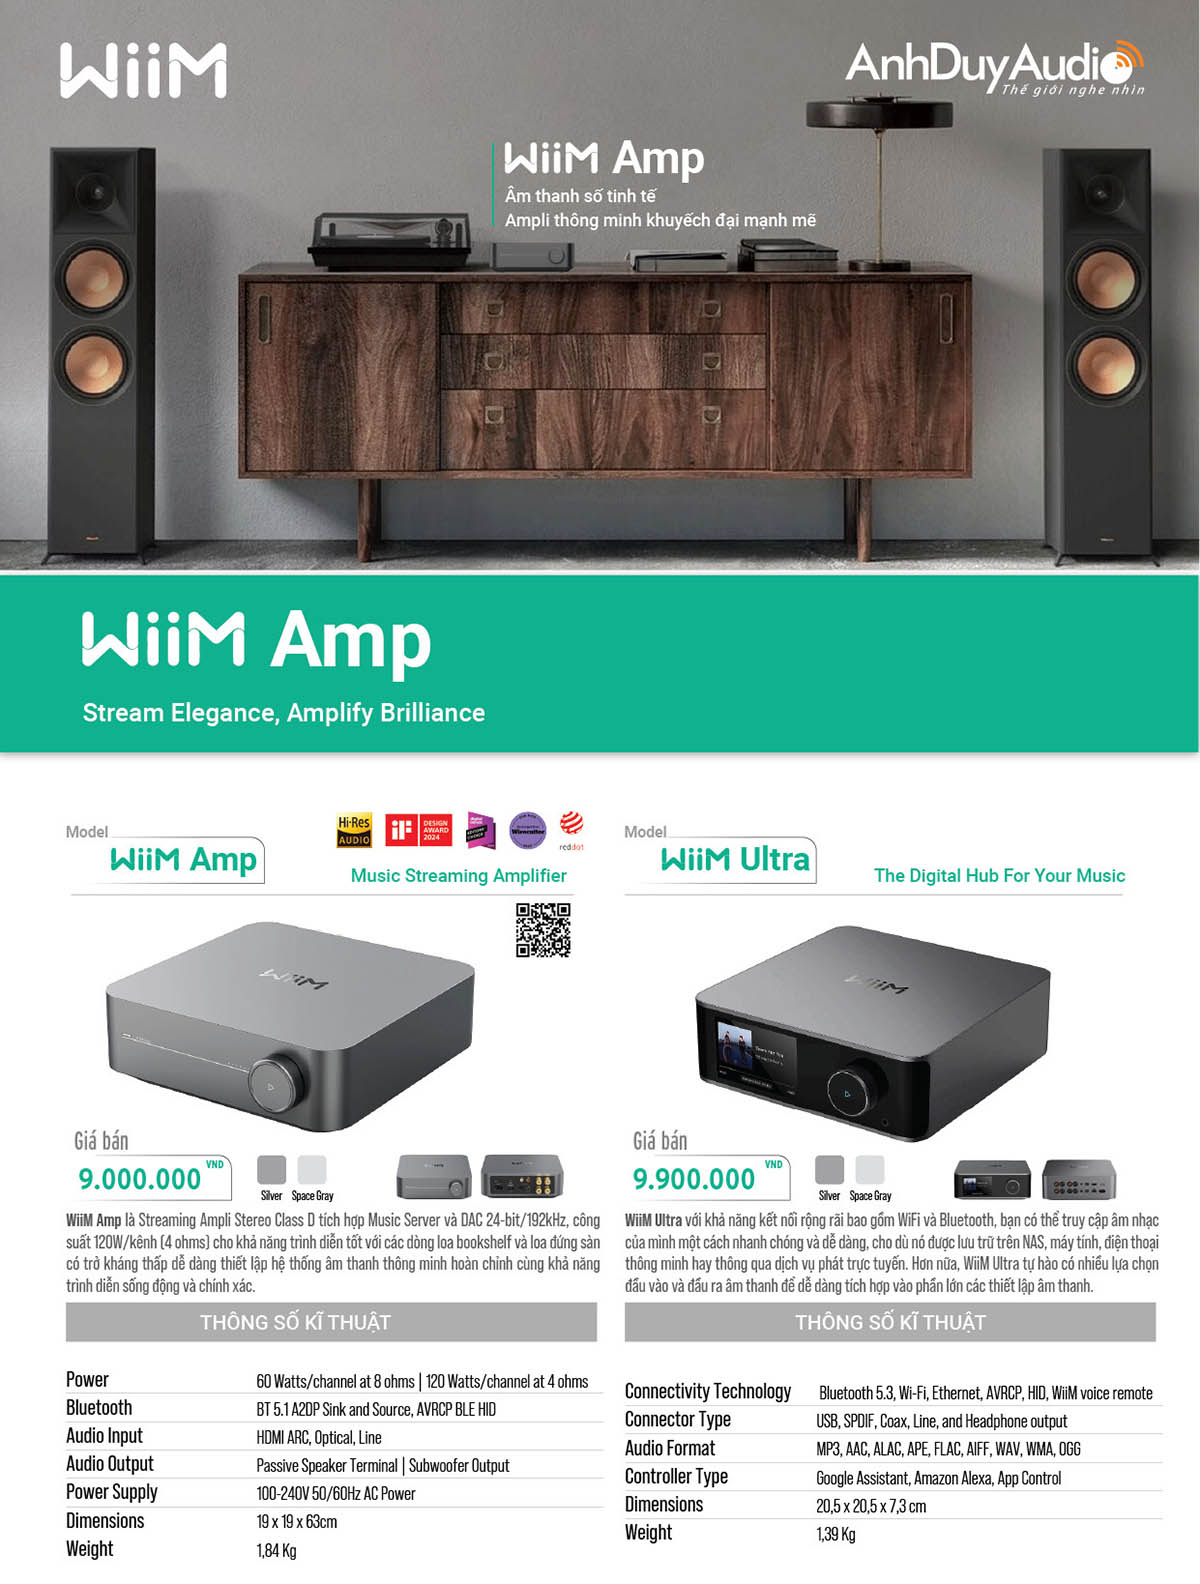 nghenhin_review_danh_gia_chi_tiet_streaming_amplifier_wiim_amp_gia_9_trieu_vnd_anhduy_audio_h13.jpg (199 KB)